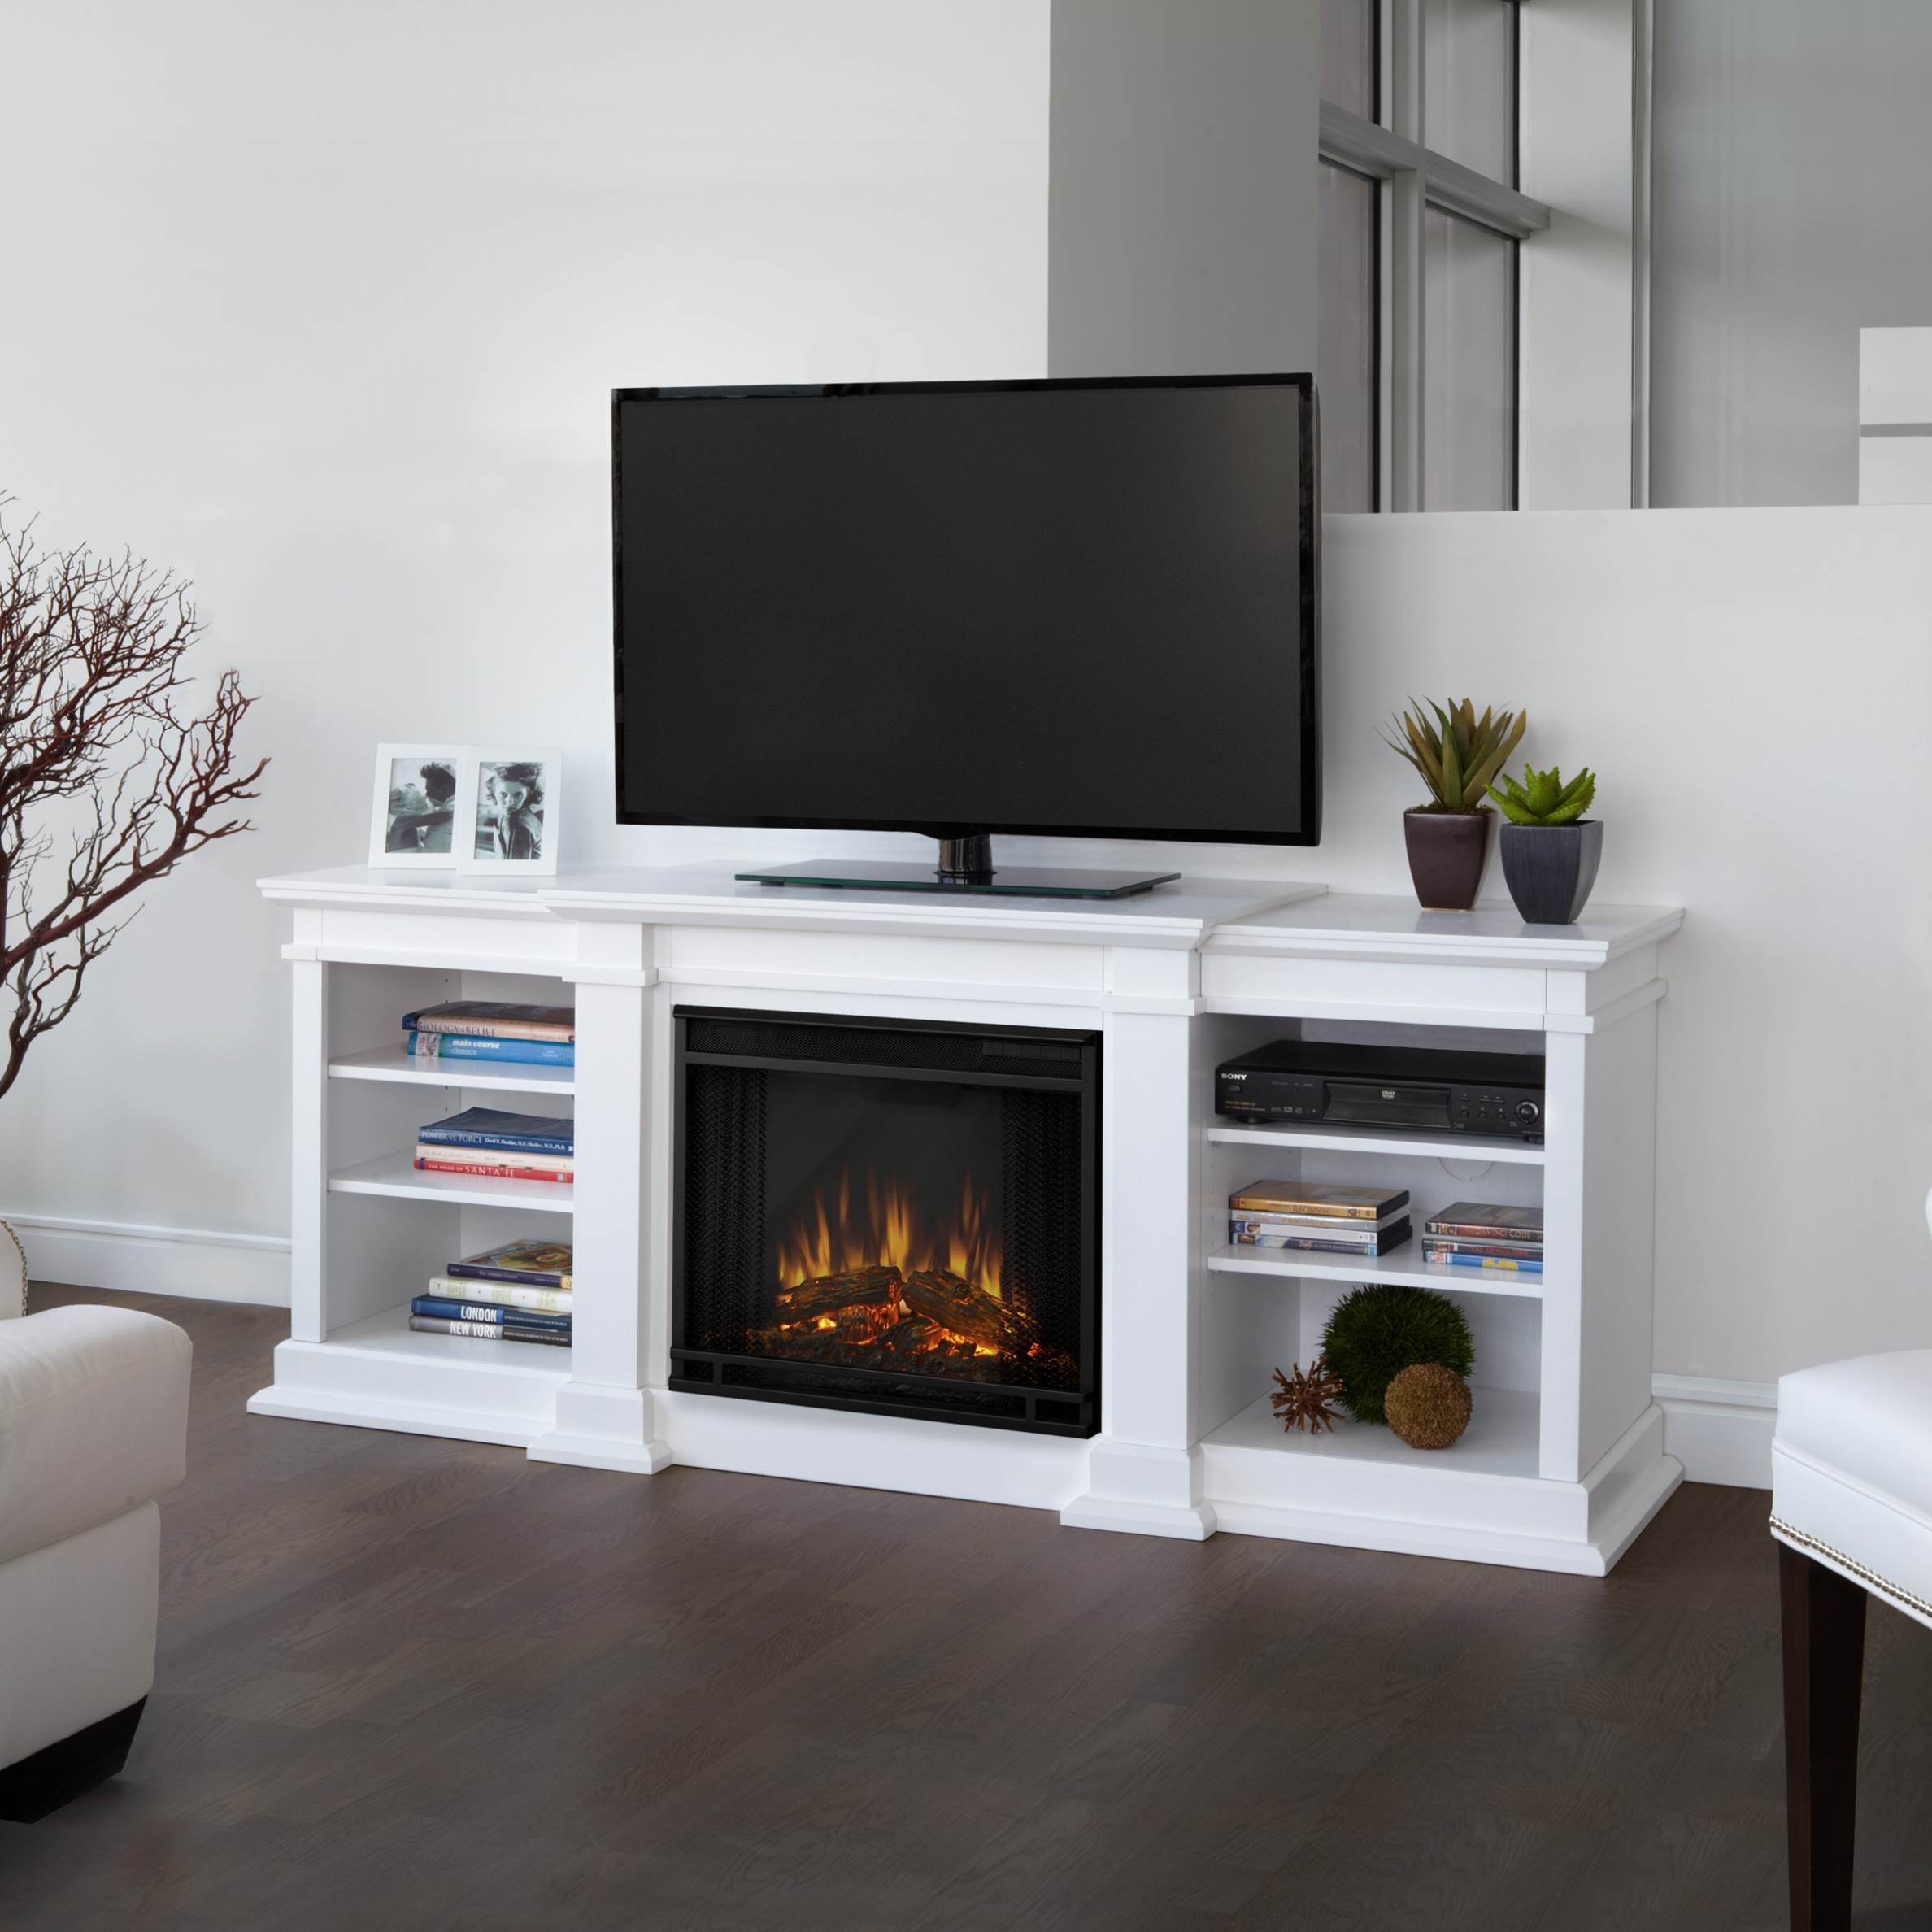 Driftwood Fireplace Tv Stand Inspirational Beautiful Home theater Entertainment Centers Furniture